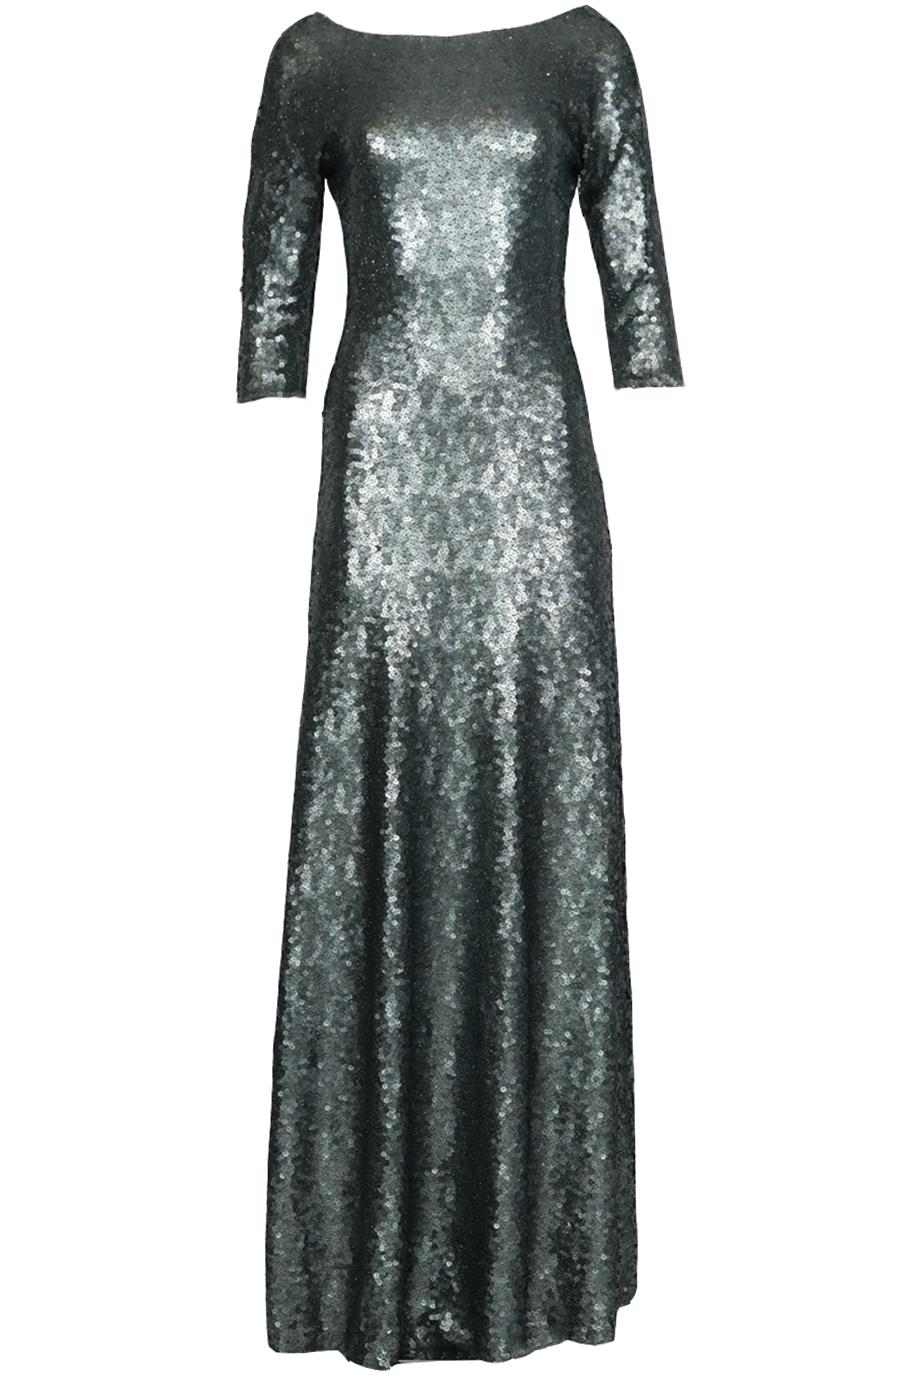 MARC JACOBS SEQUINNED SATIN MAXI DRESS US 2 UK 6